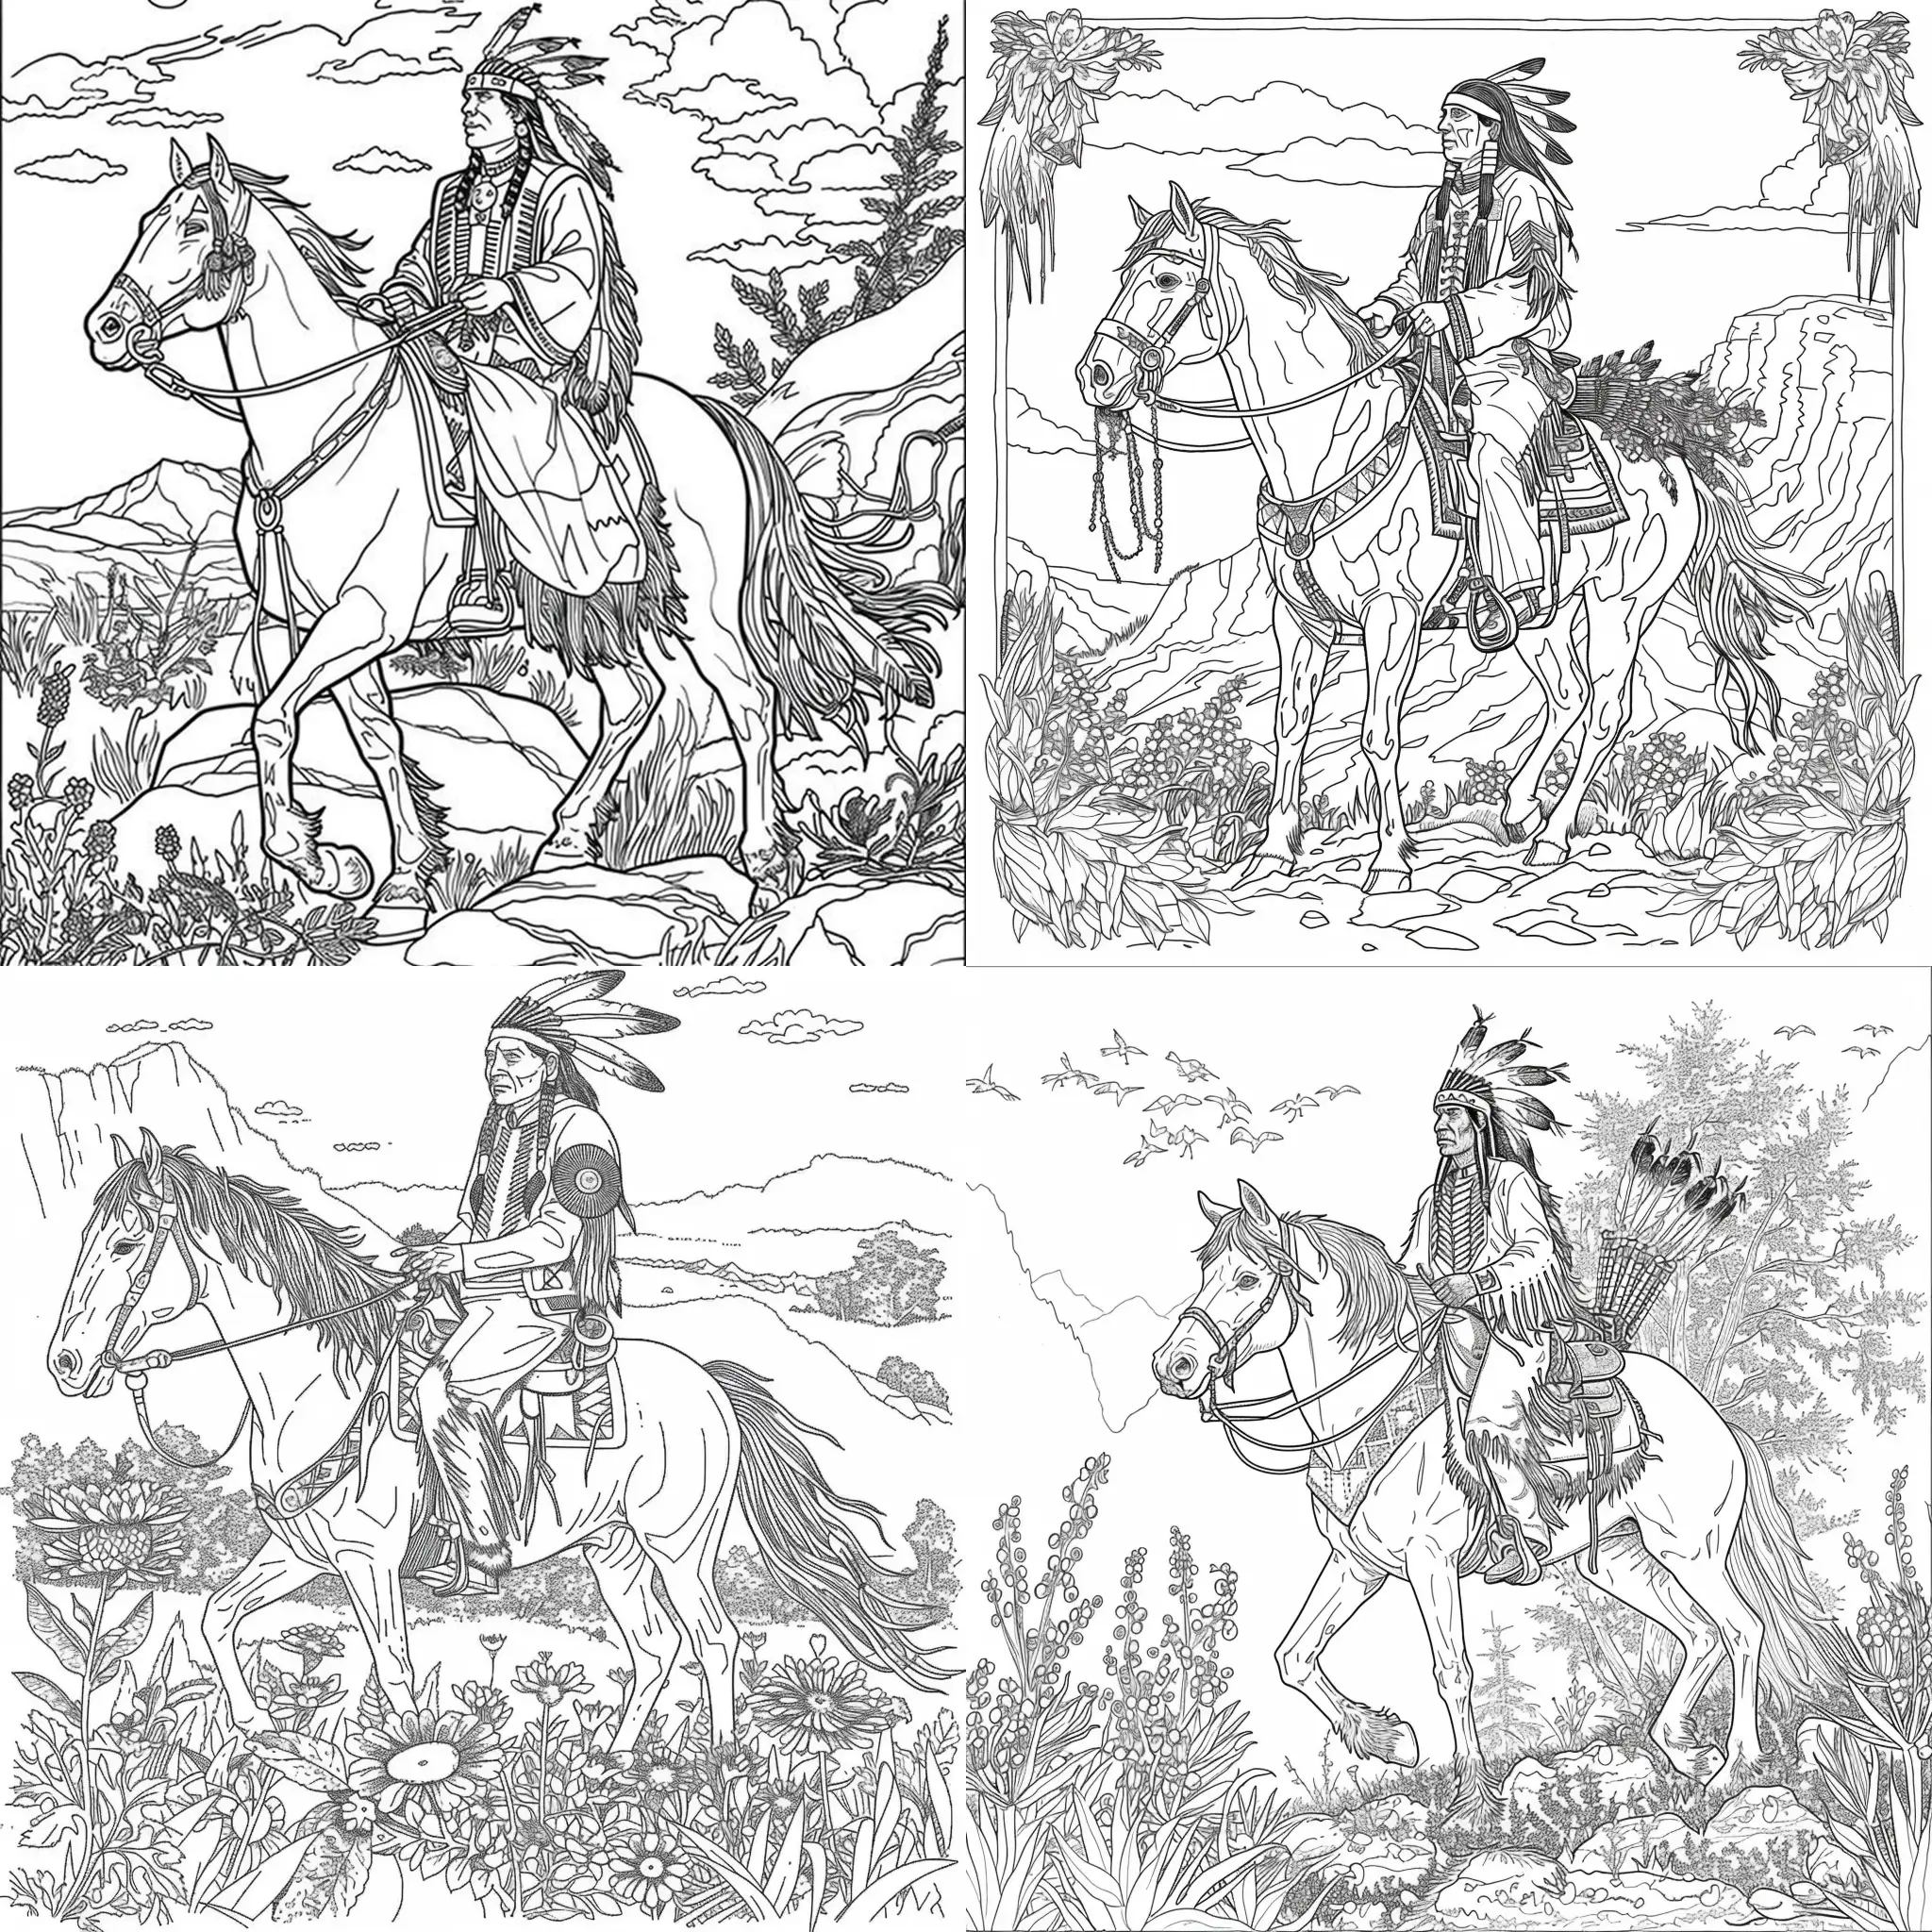 Native-American-Medicine-Man-Riding-Horse-with-Herbs-Coloring-Page